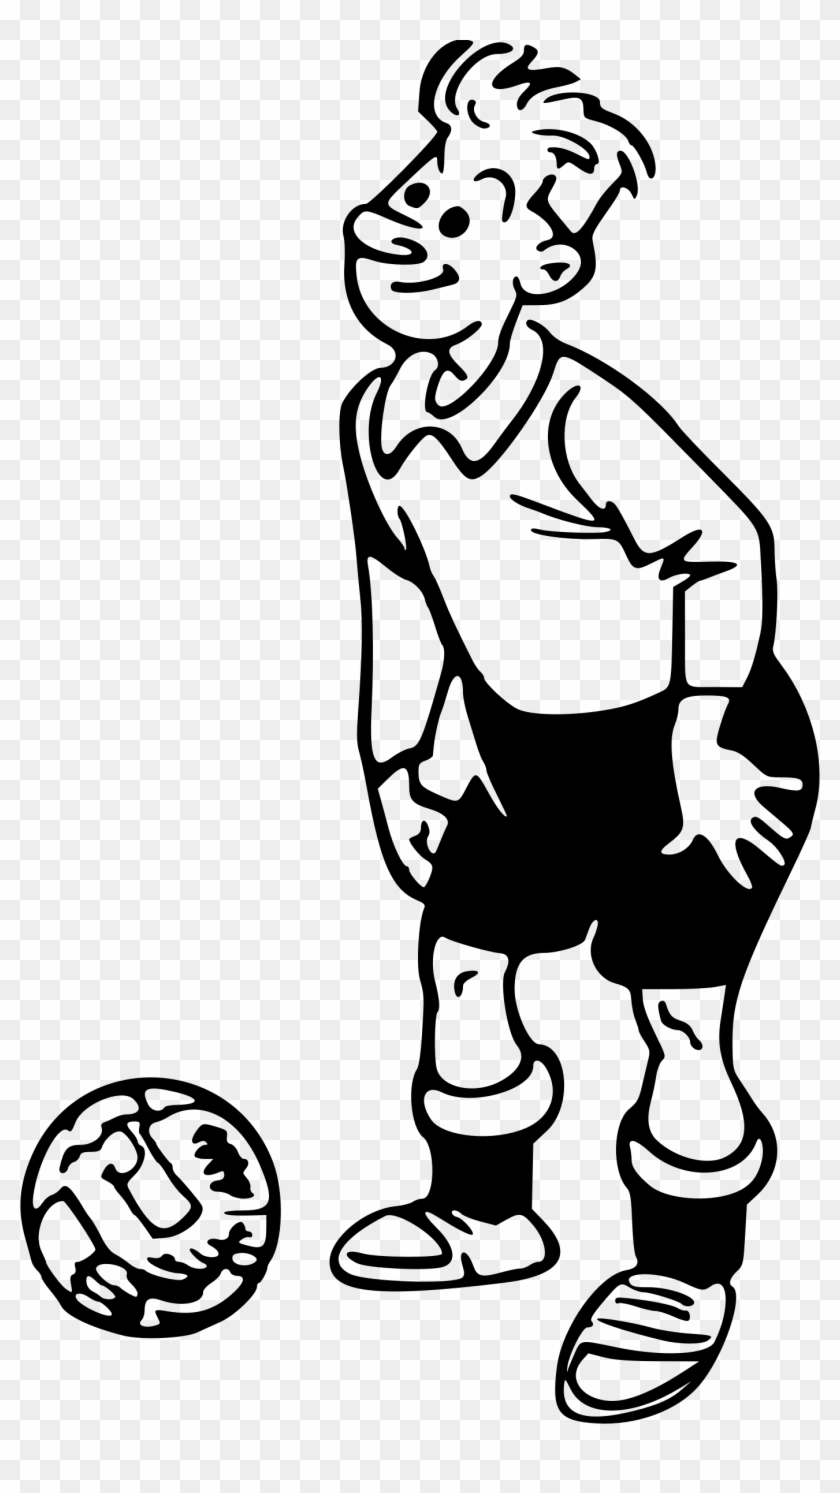 This Free Icons Png Design Of Soccer Player 2 Clipart #799219